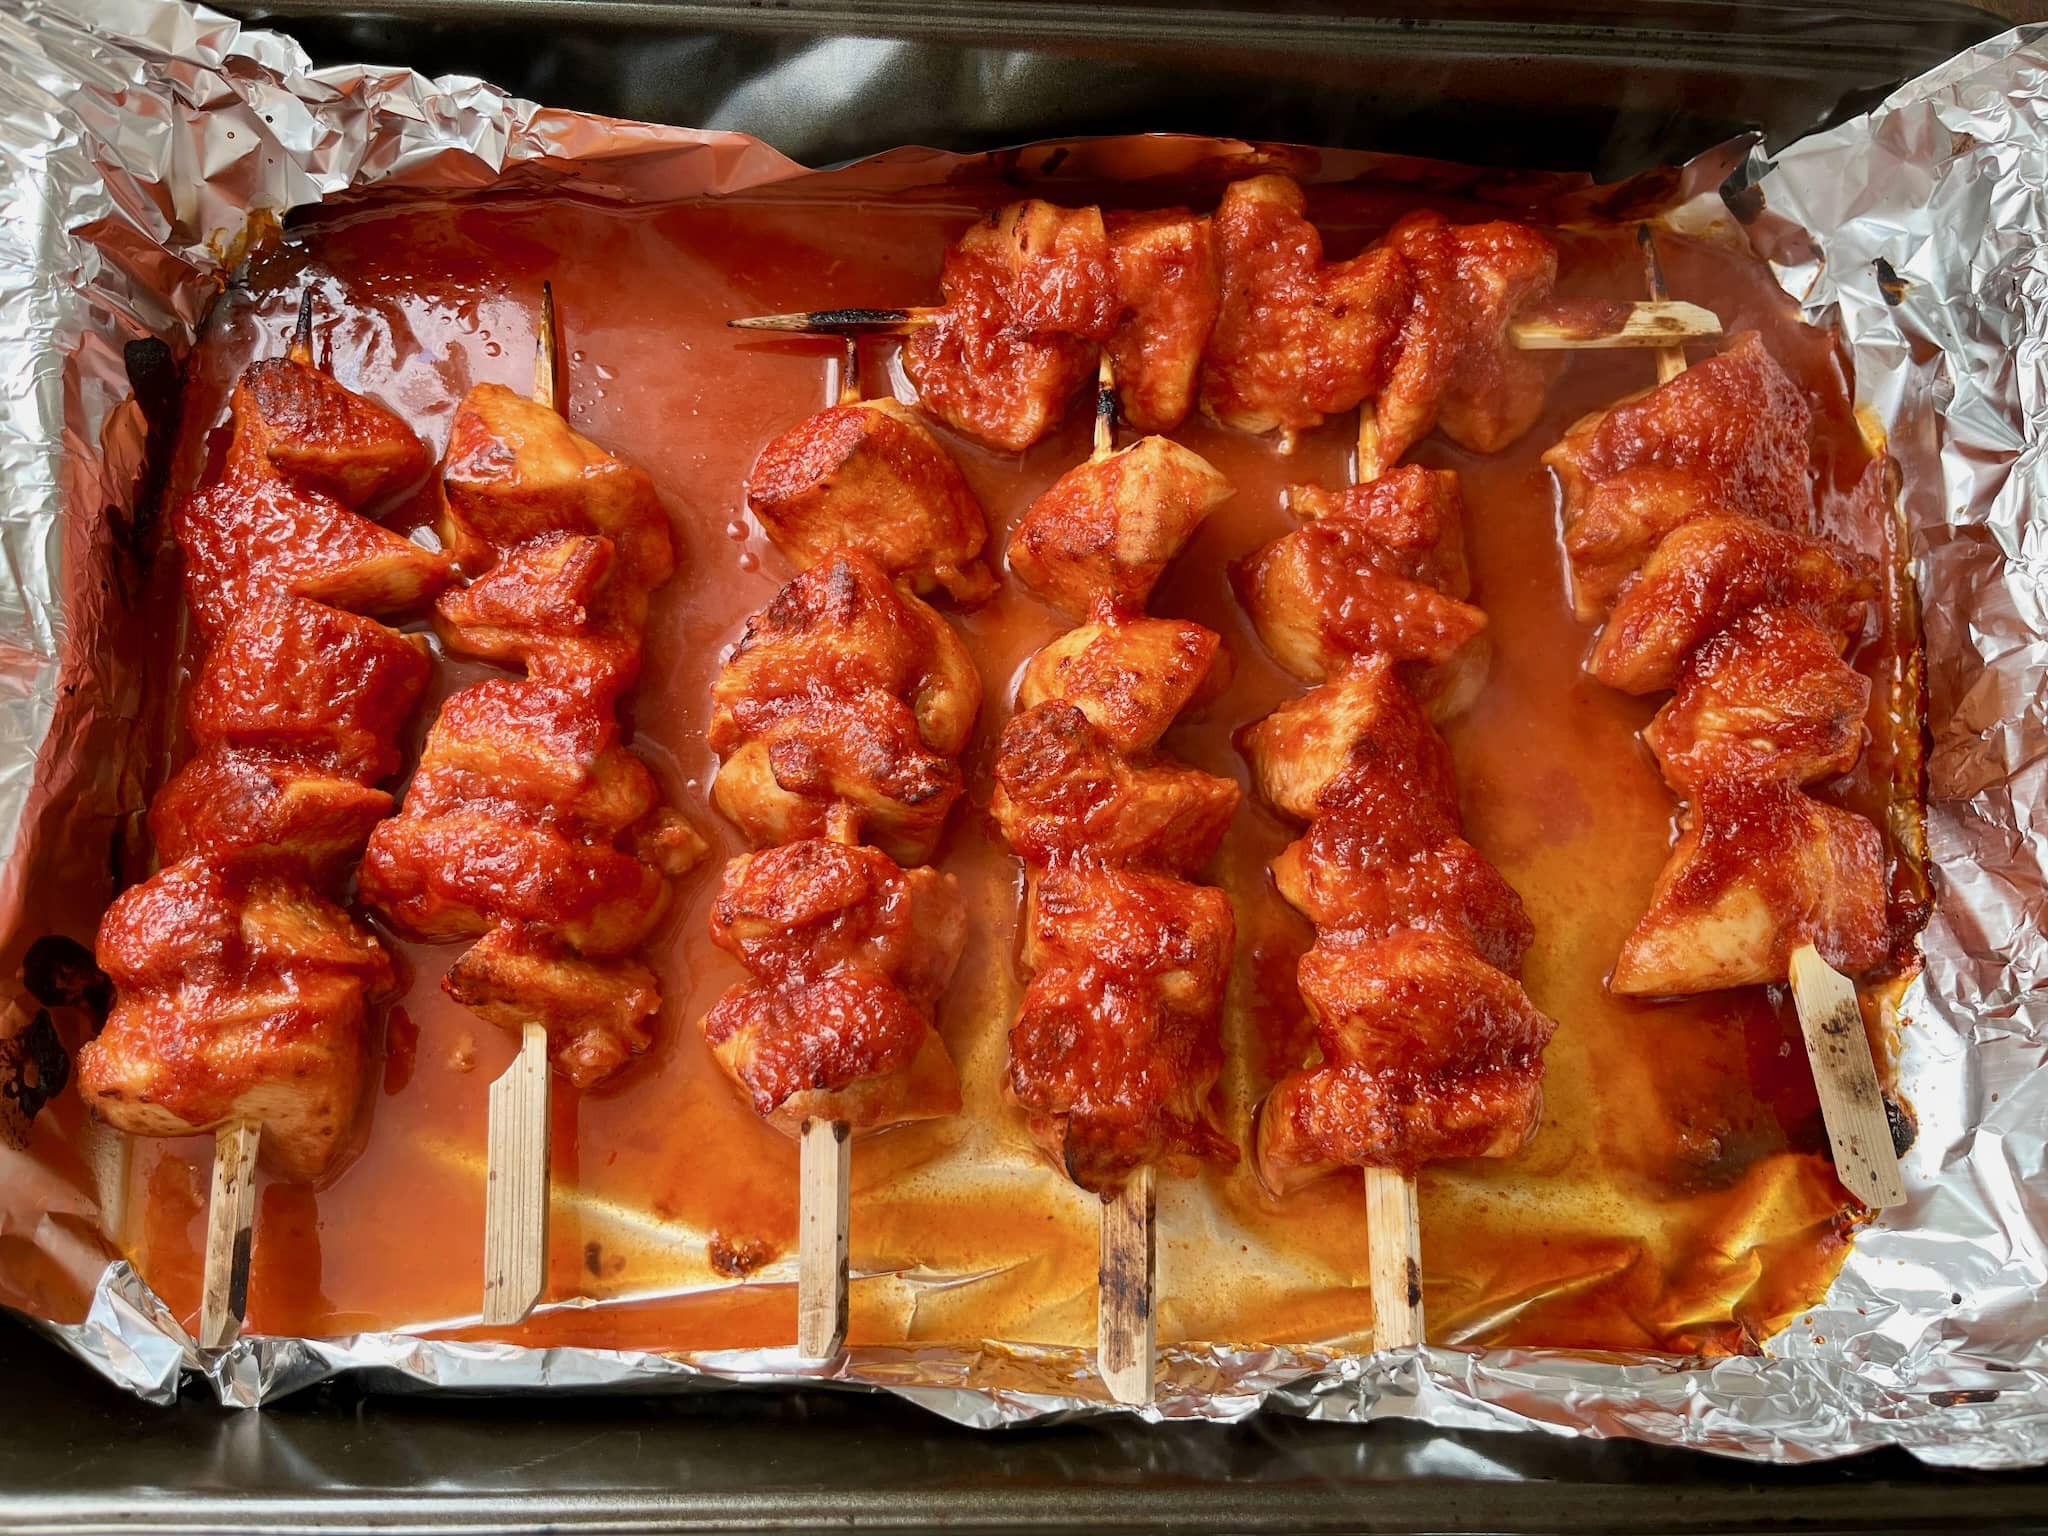 Baked Sticky Chicken Skewers straight from the oven